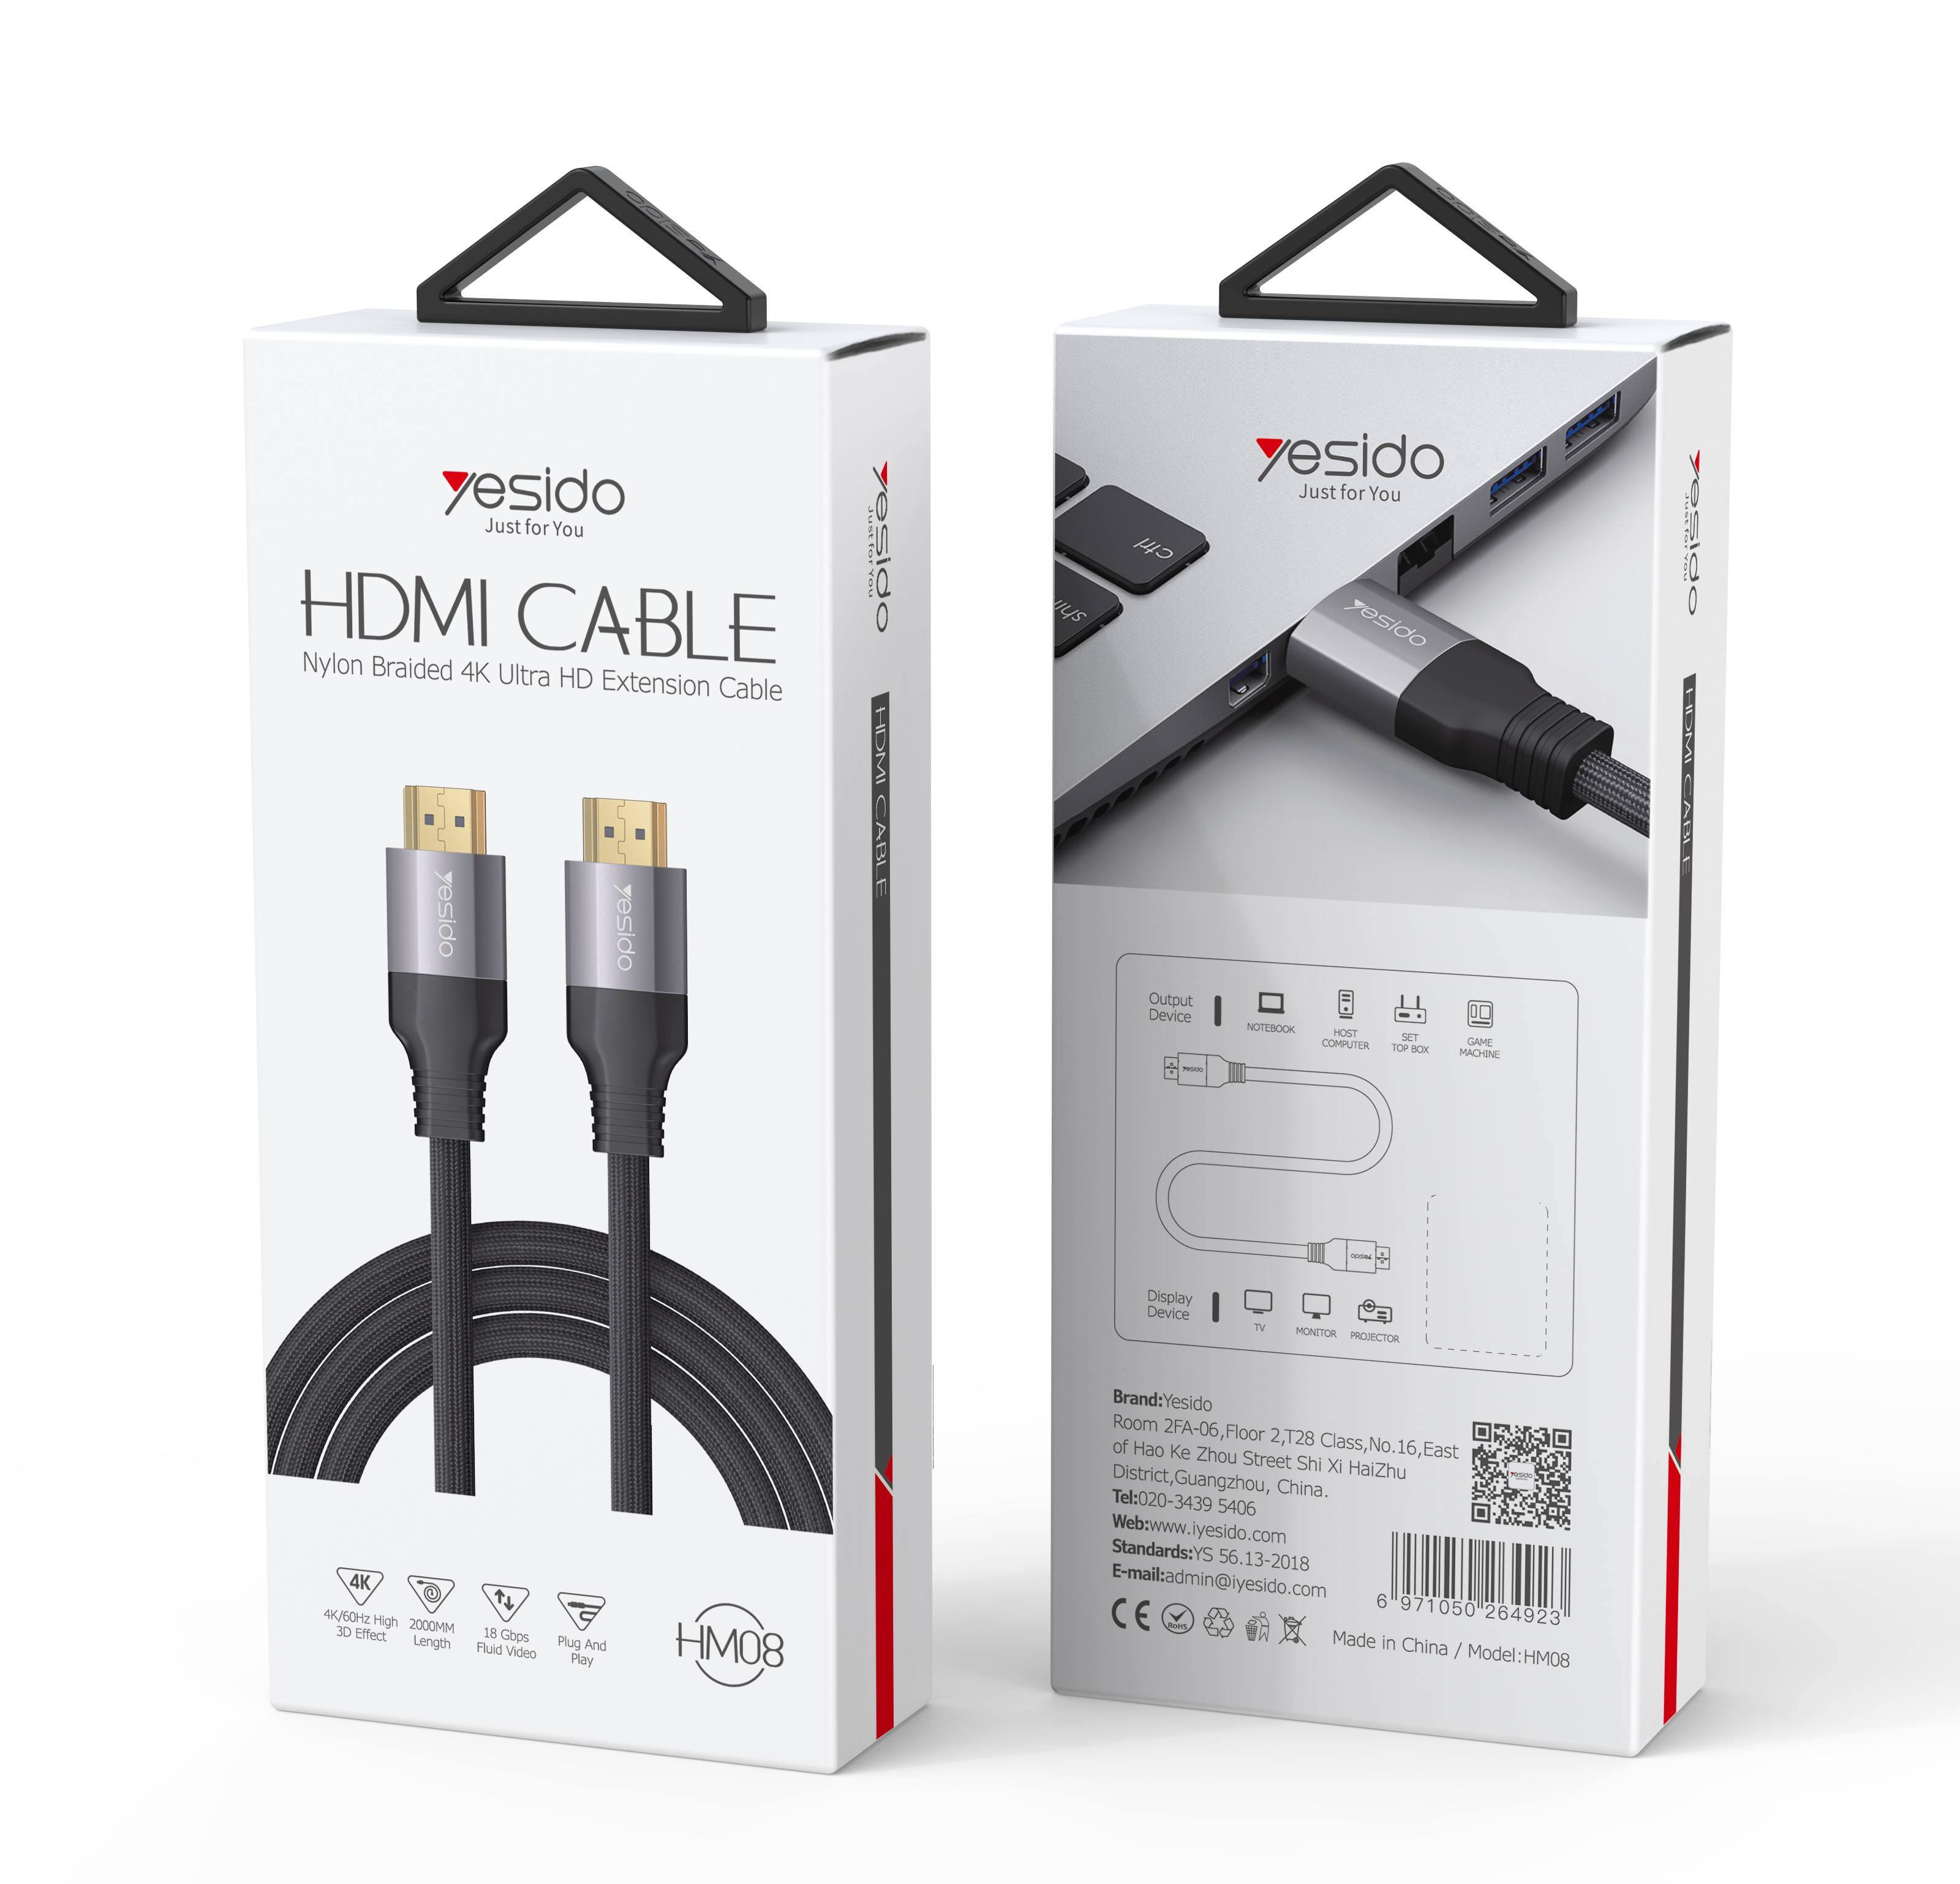 HM08 HDMI to HDMI Video Cable Packaging